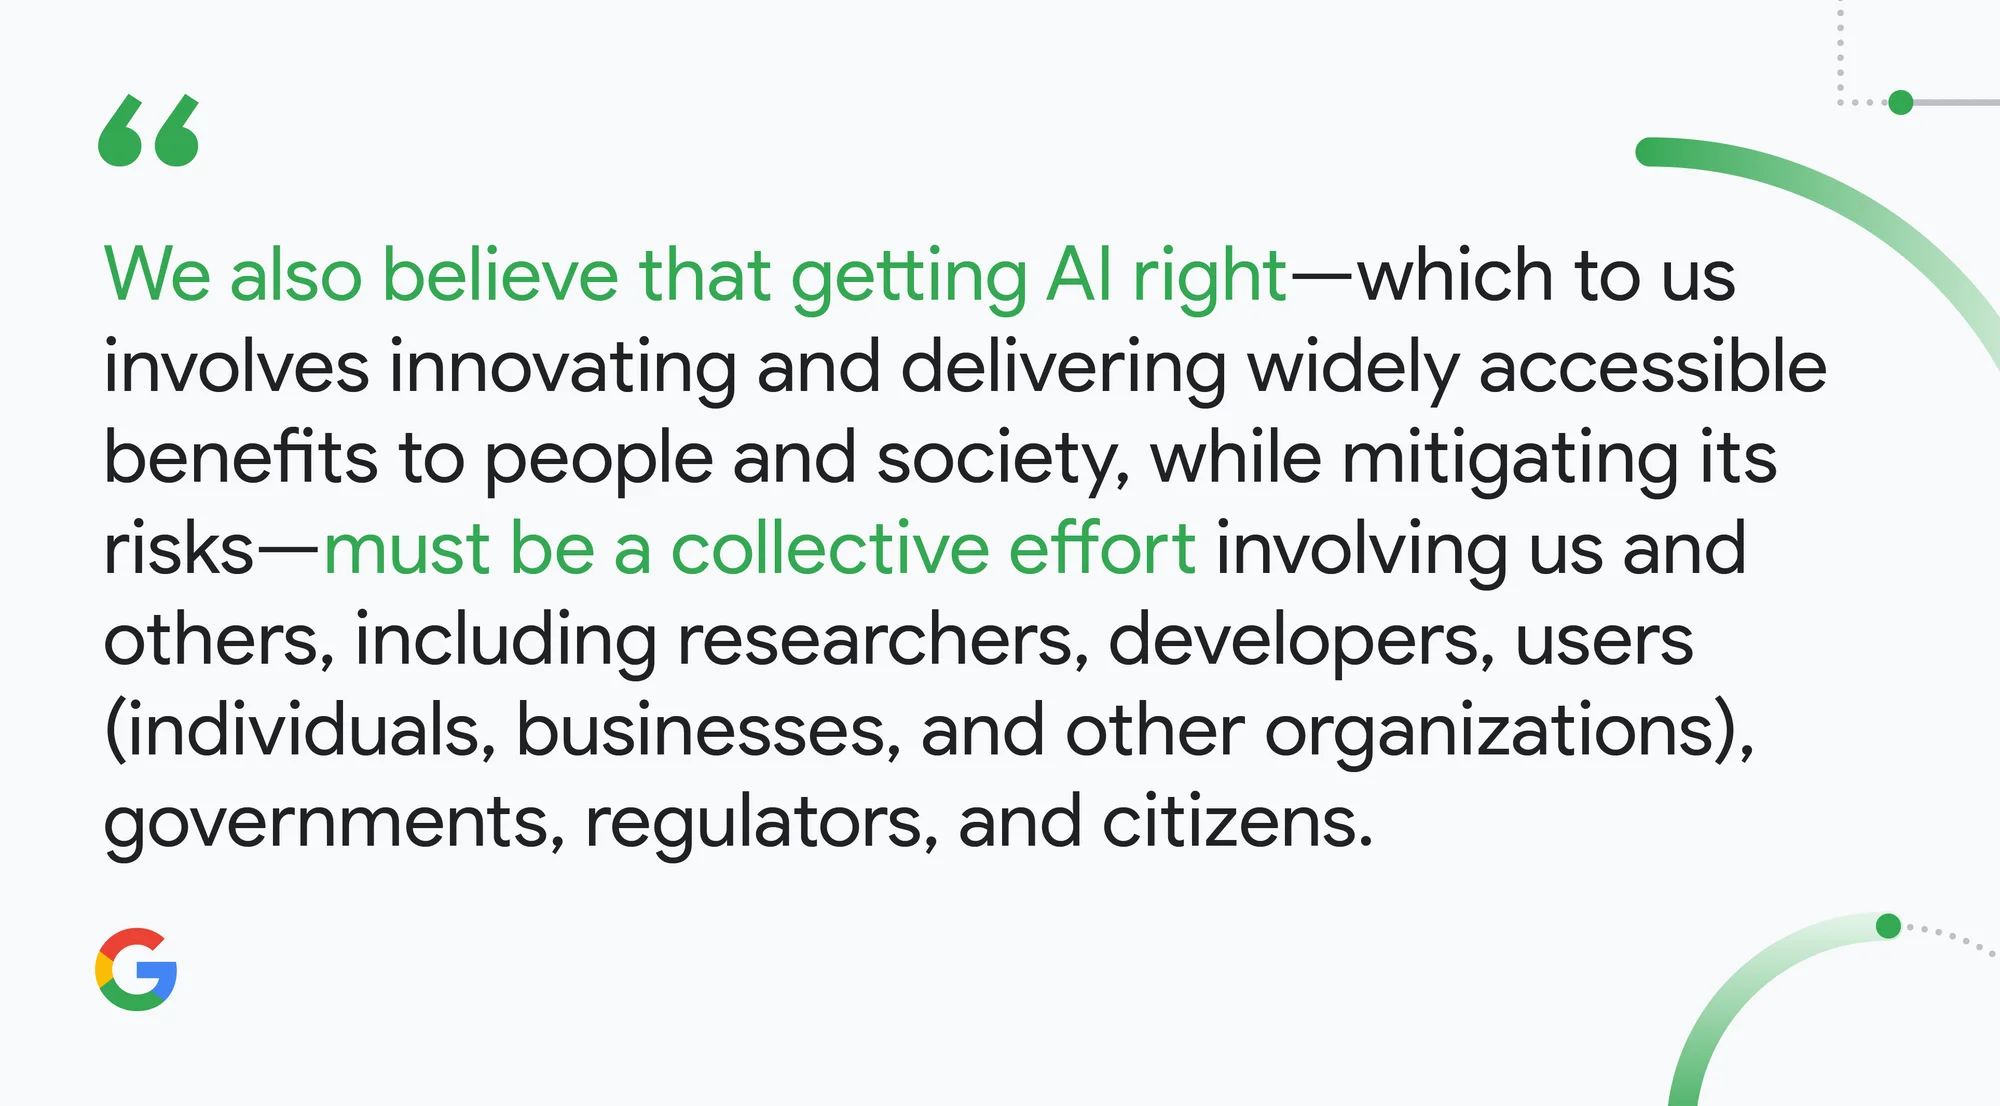 Italicized quotes expressing that developing AI responsibly, with benefits for everyone, must be a collective effort